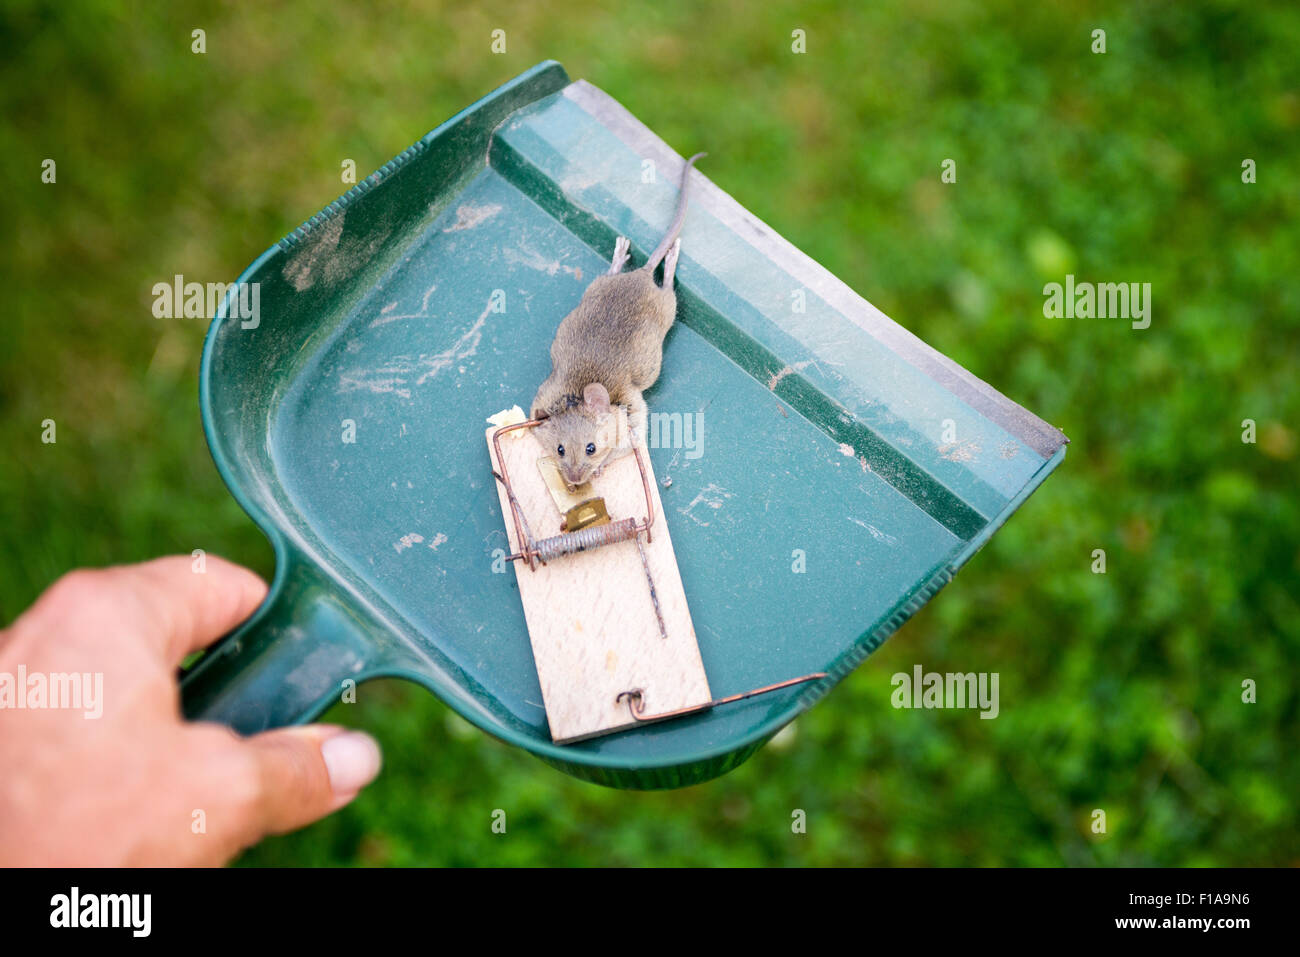 https://c8.alamy.com/comp/F1A9N6/dead-animal-mouse-in-trap-lying-on-green-grass-lawn-garden-park-outside-F1A9N6.jpg